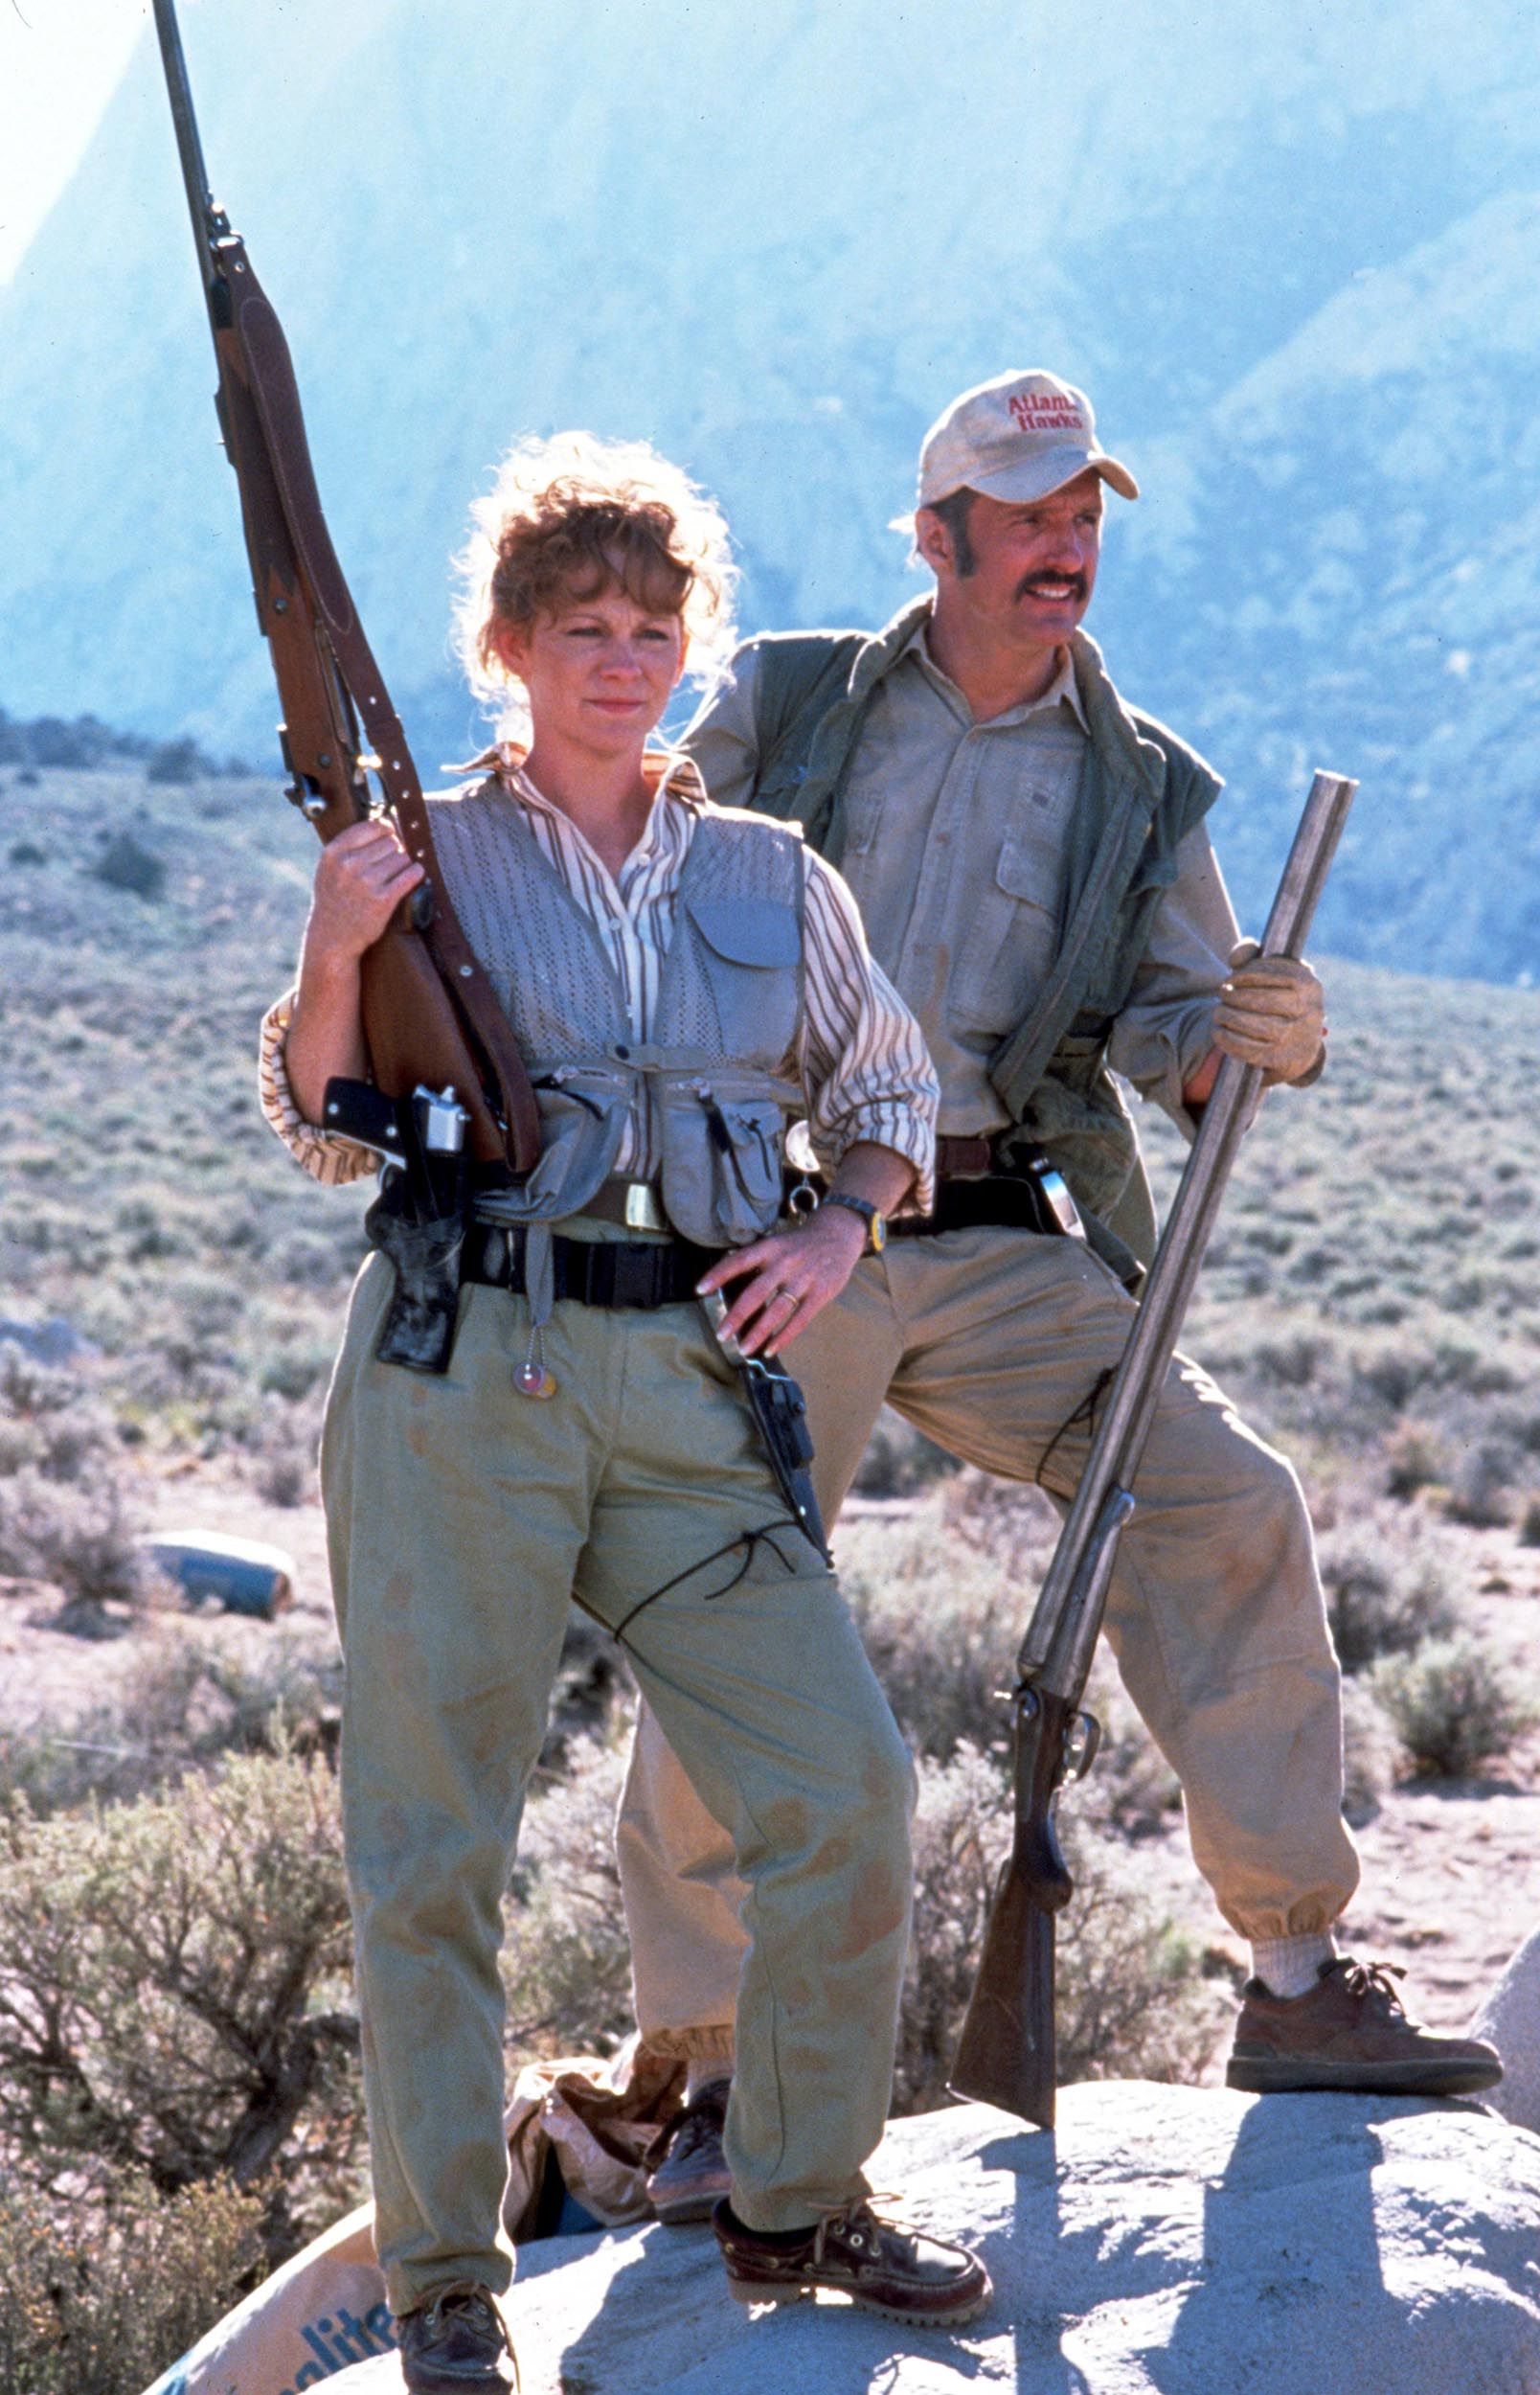 Tremors Anniversary: Kevin Bacon, Michael Gross